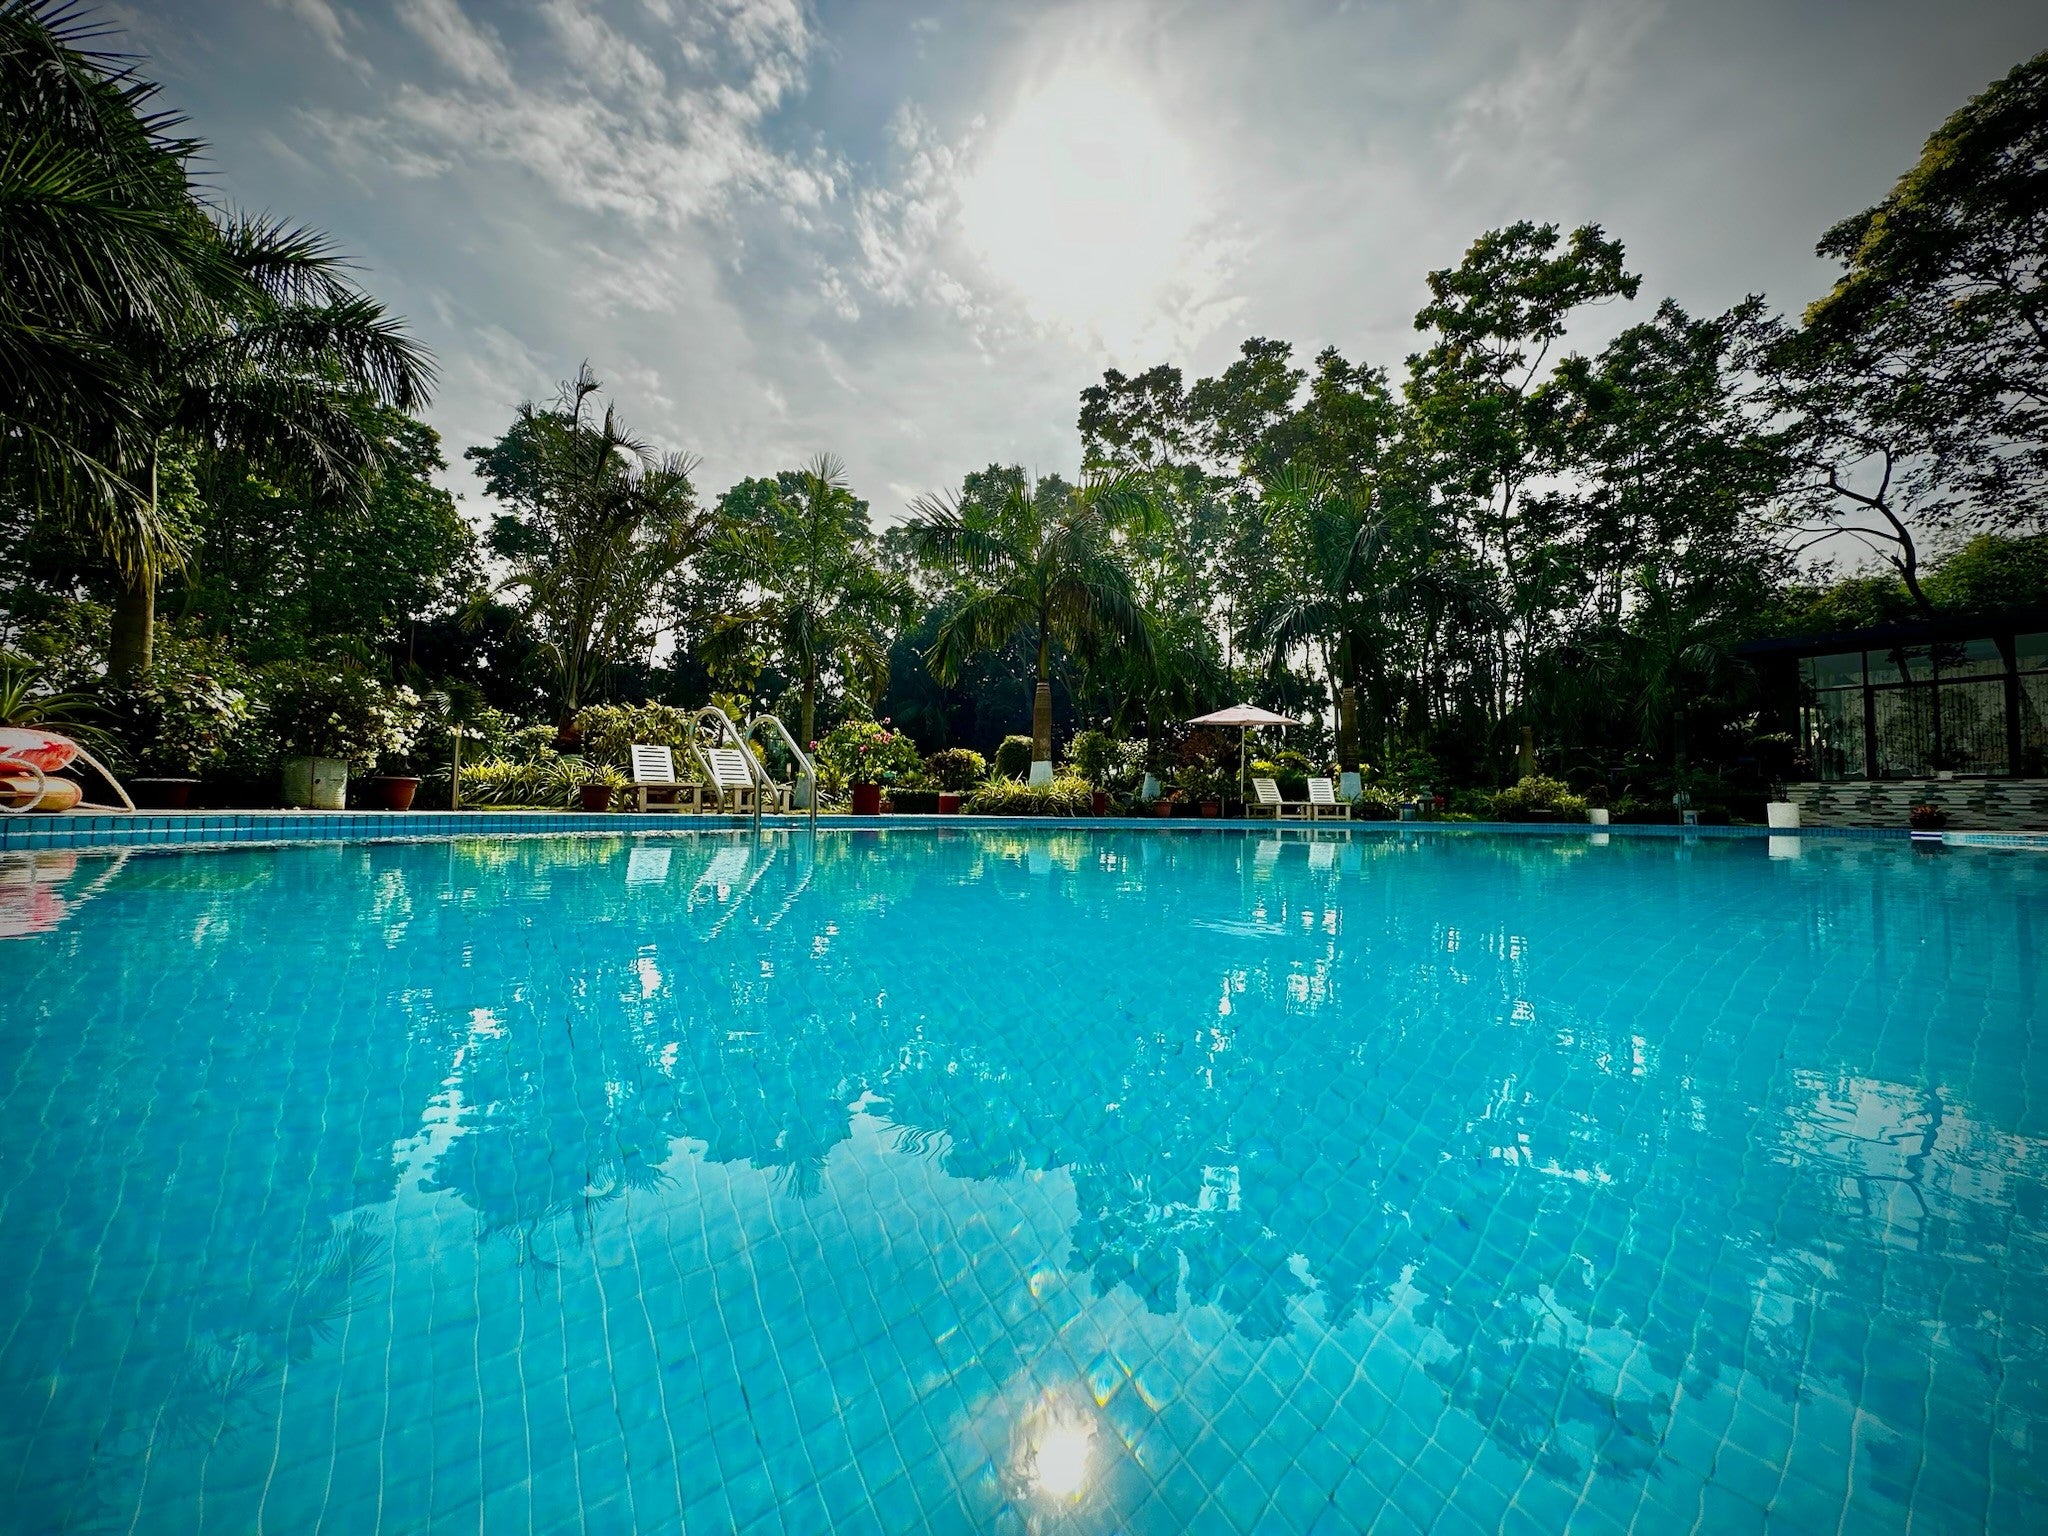 Serene pool at Barnochata Resort in Savar near Dhaka, with crystal clear blue waters, surrounded by lush tropical foliage under a bright sky